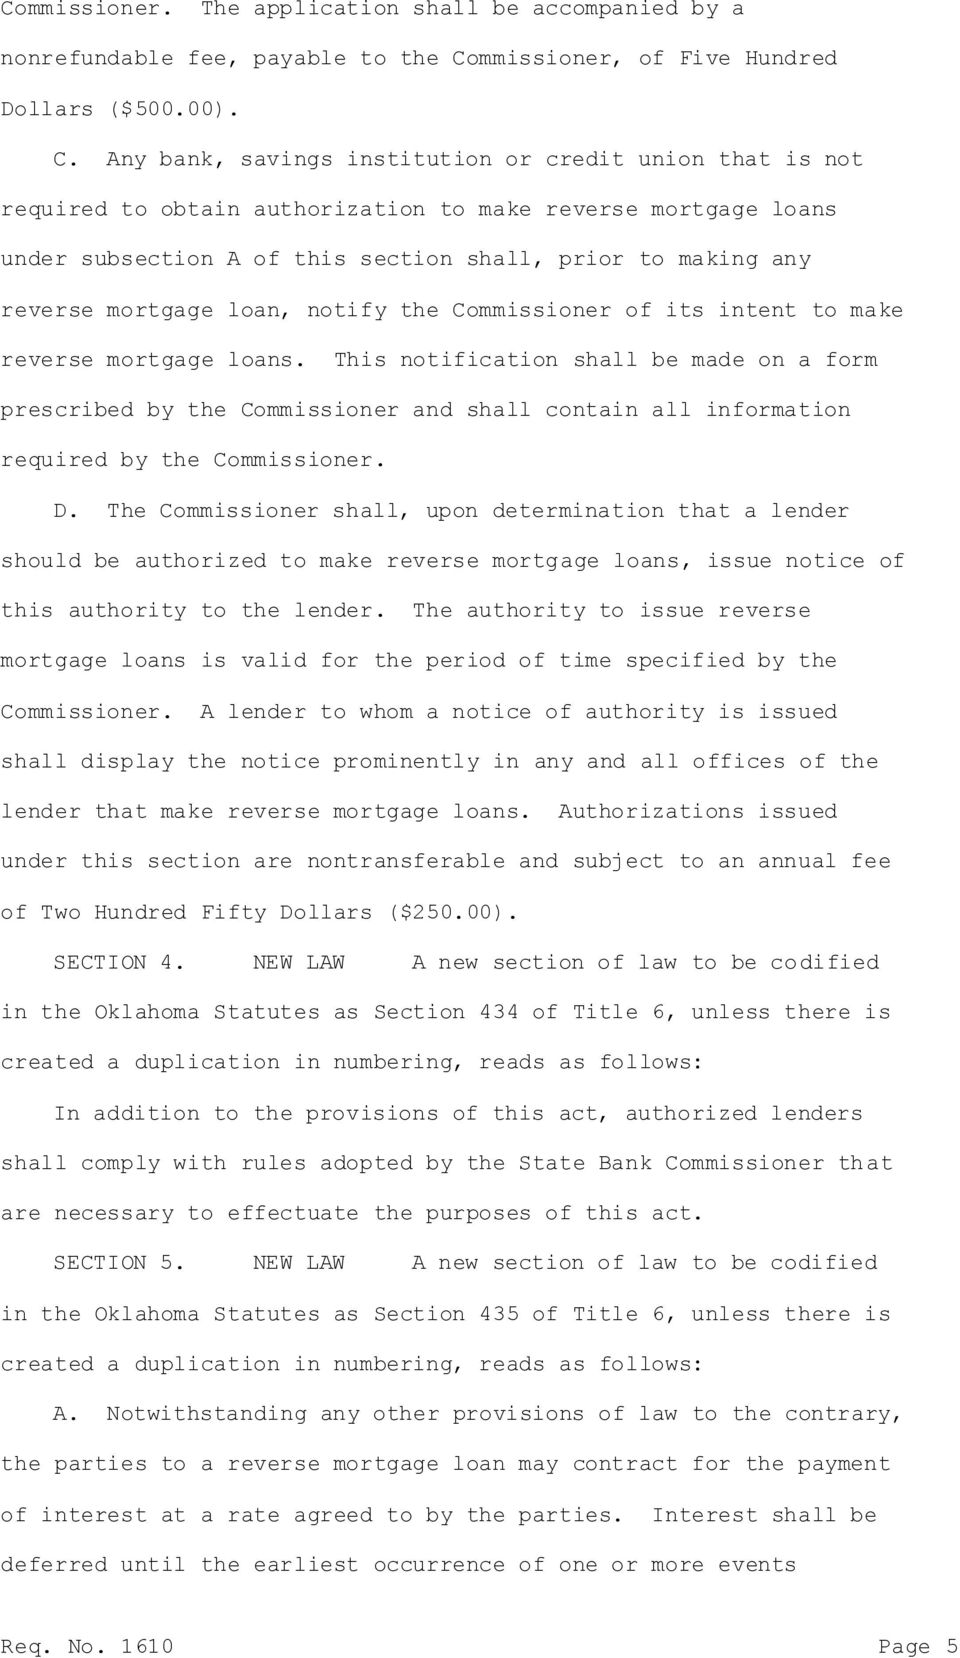 Any bank, savings institution or credit union that is not required to obtain authorization to make reverse mortgage loans under subsection A of this section shall, prior to making any reverse